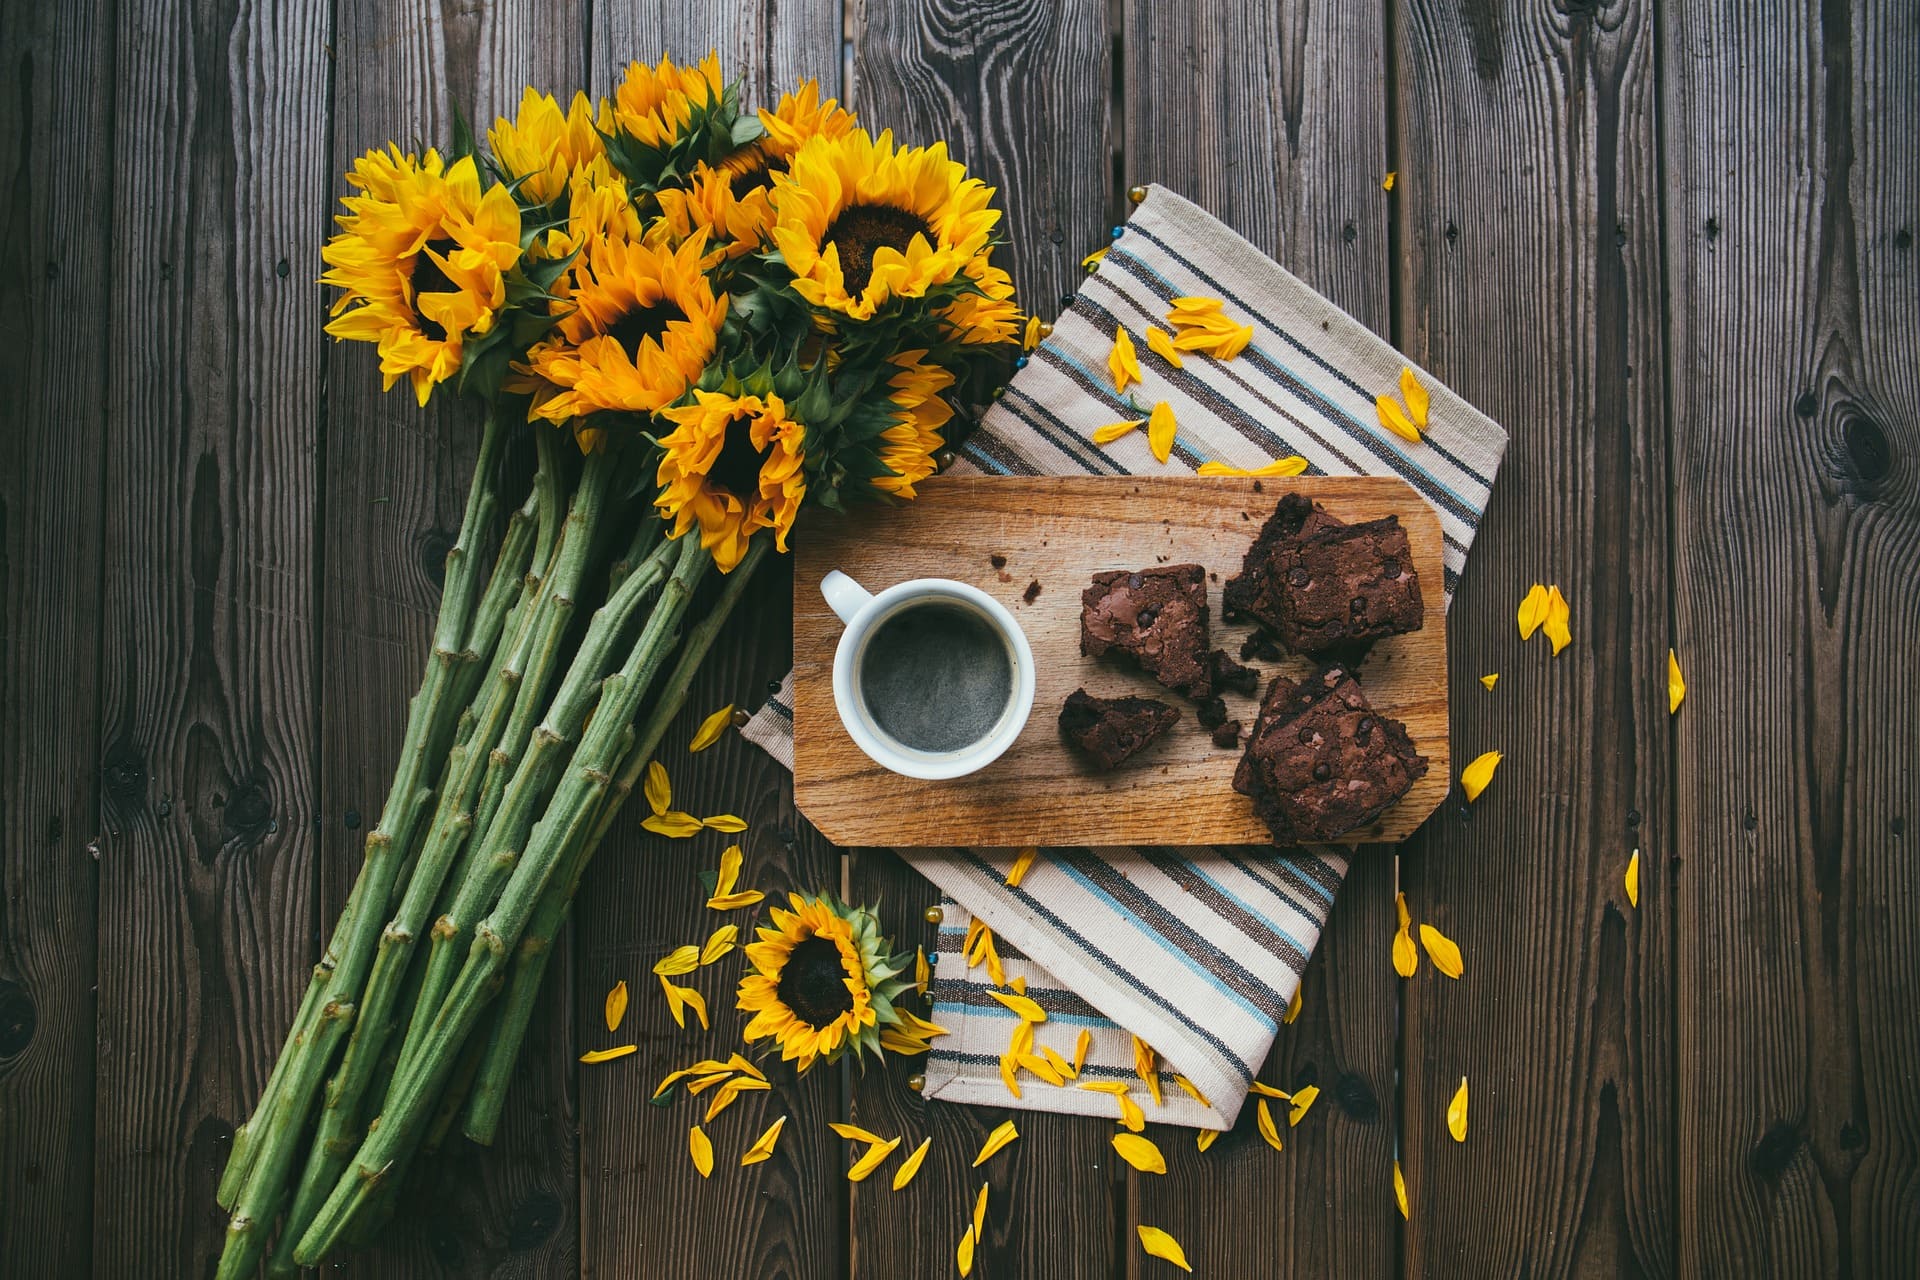 Brownies on a wooden tray with coffee and flowers on the side.  | Source: Pixabay 